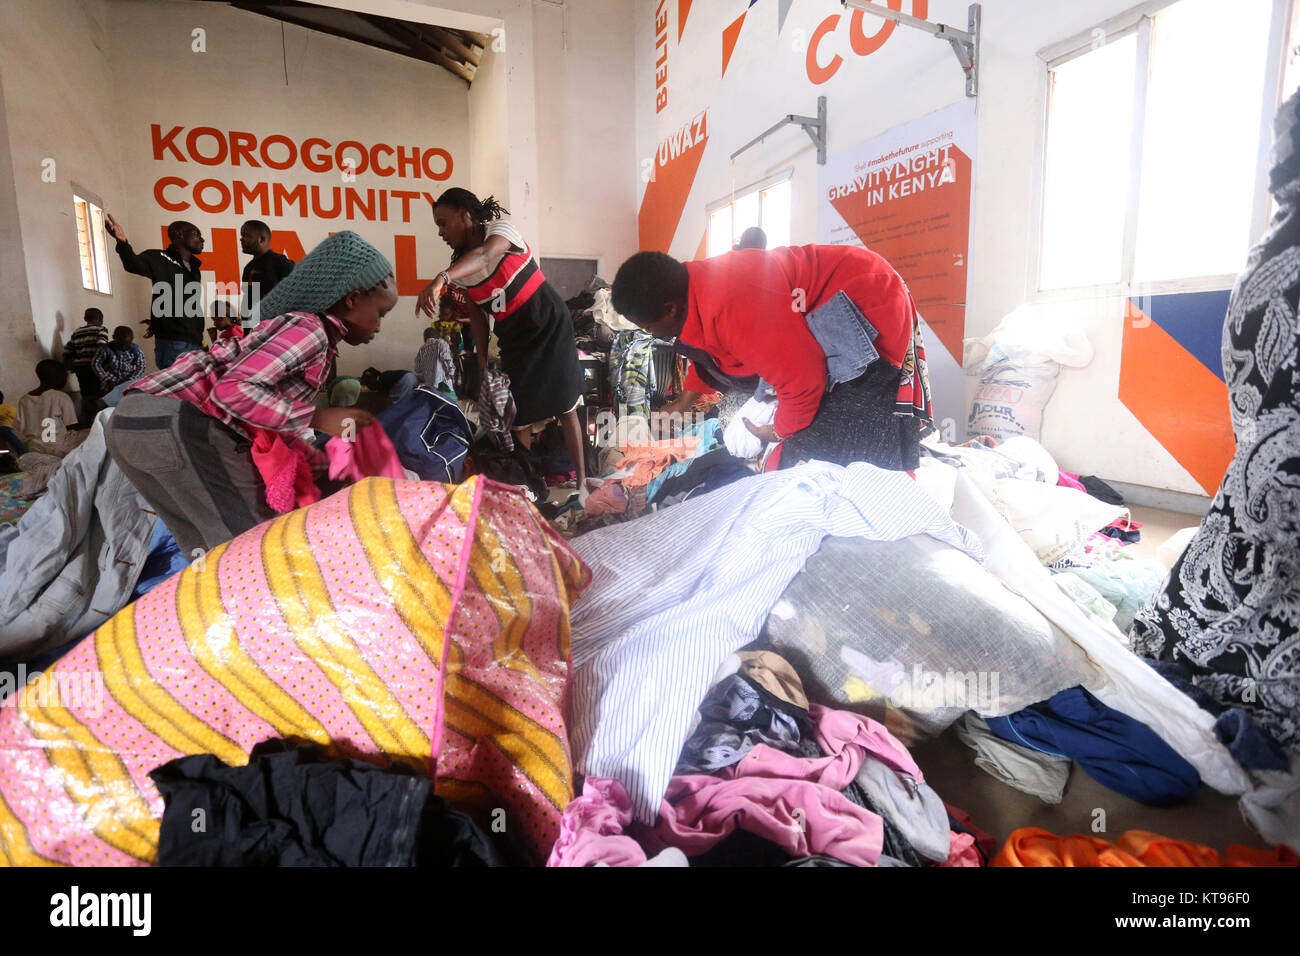 Nairobi, Kenya. 22nd Dec, 2017. Women seen sorting out hundreds of clothes. Some of Kororgocho slum dwellers in Nairobi, Kenya sift through assorted clothing donated through an initiative dubbed ''˜Mng'aro Mtaani' ahead of Christmas celebration where people across the city give out clothing they don't use to the less fortunate. Initiative's founder Mr. Sam Omoll ''“ Torez who grew up in the slum said over 60,000 people living in Korogocho lack basic needs among them shelter, clothing, clean water and food. Majority survive on less than 1 USD a day, experience high crime rate, lack Stock Photo